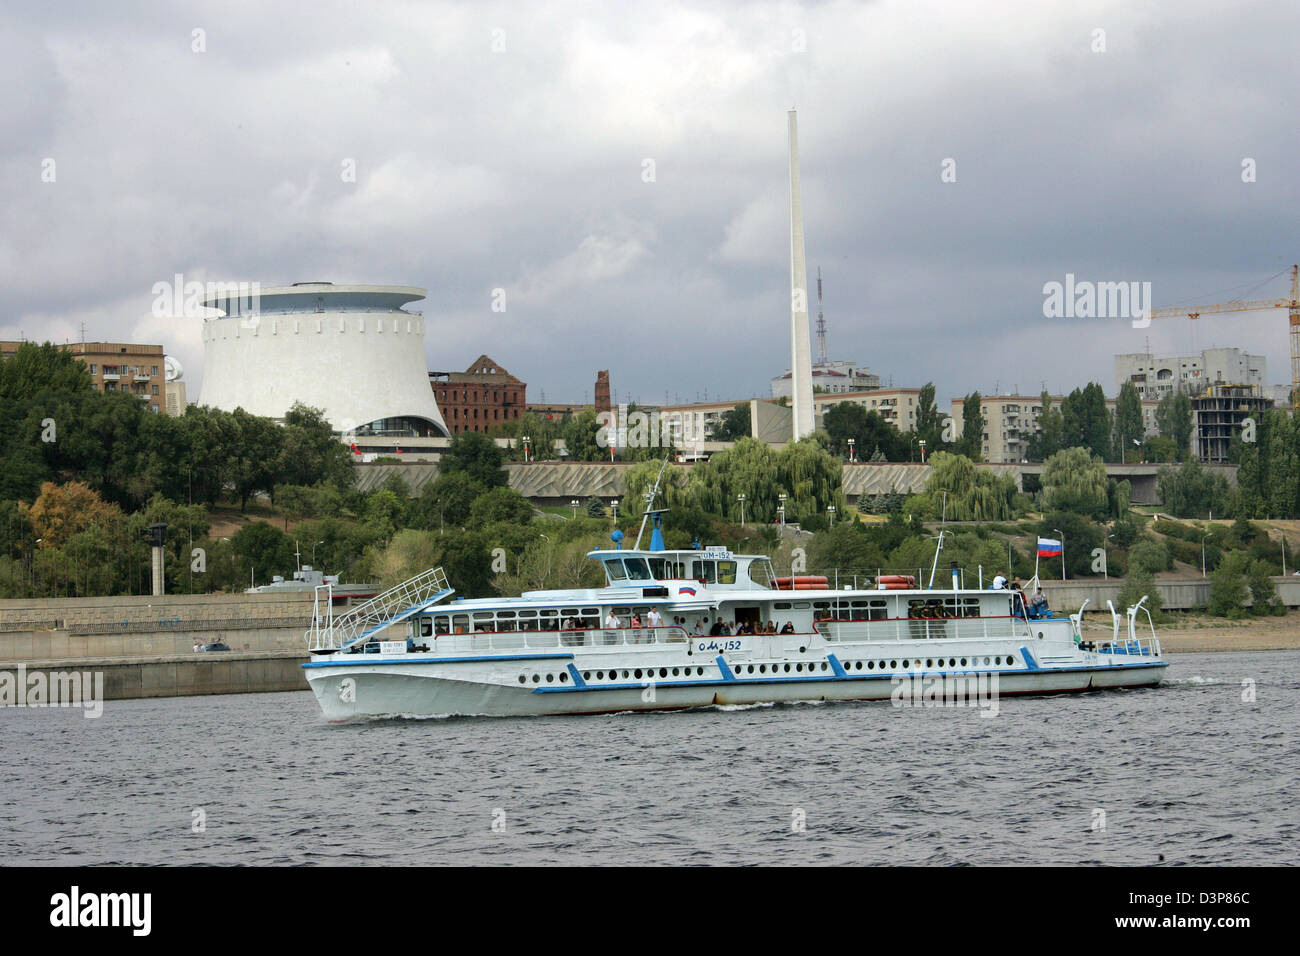 View over an excursion boat on the Volga river on the panoramic museum of Volgograd, Russia, 10 September 2006. The museum hosts a panoramic painting as well as exhibits of the Battle of Stalingrad. Photo: Uwe Zucchi Stock Photo